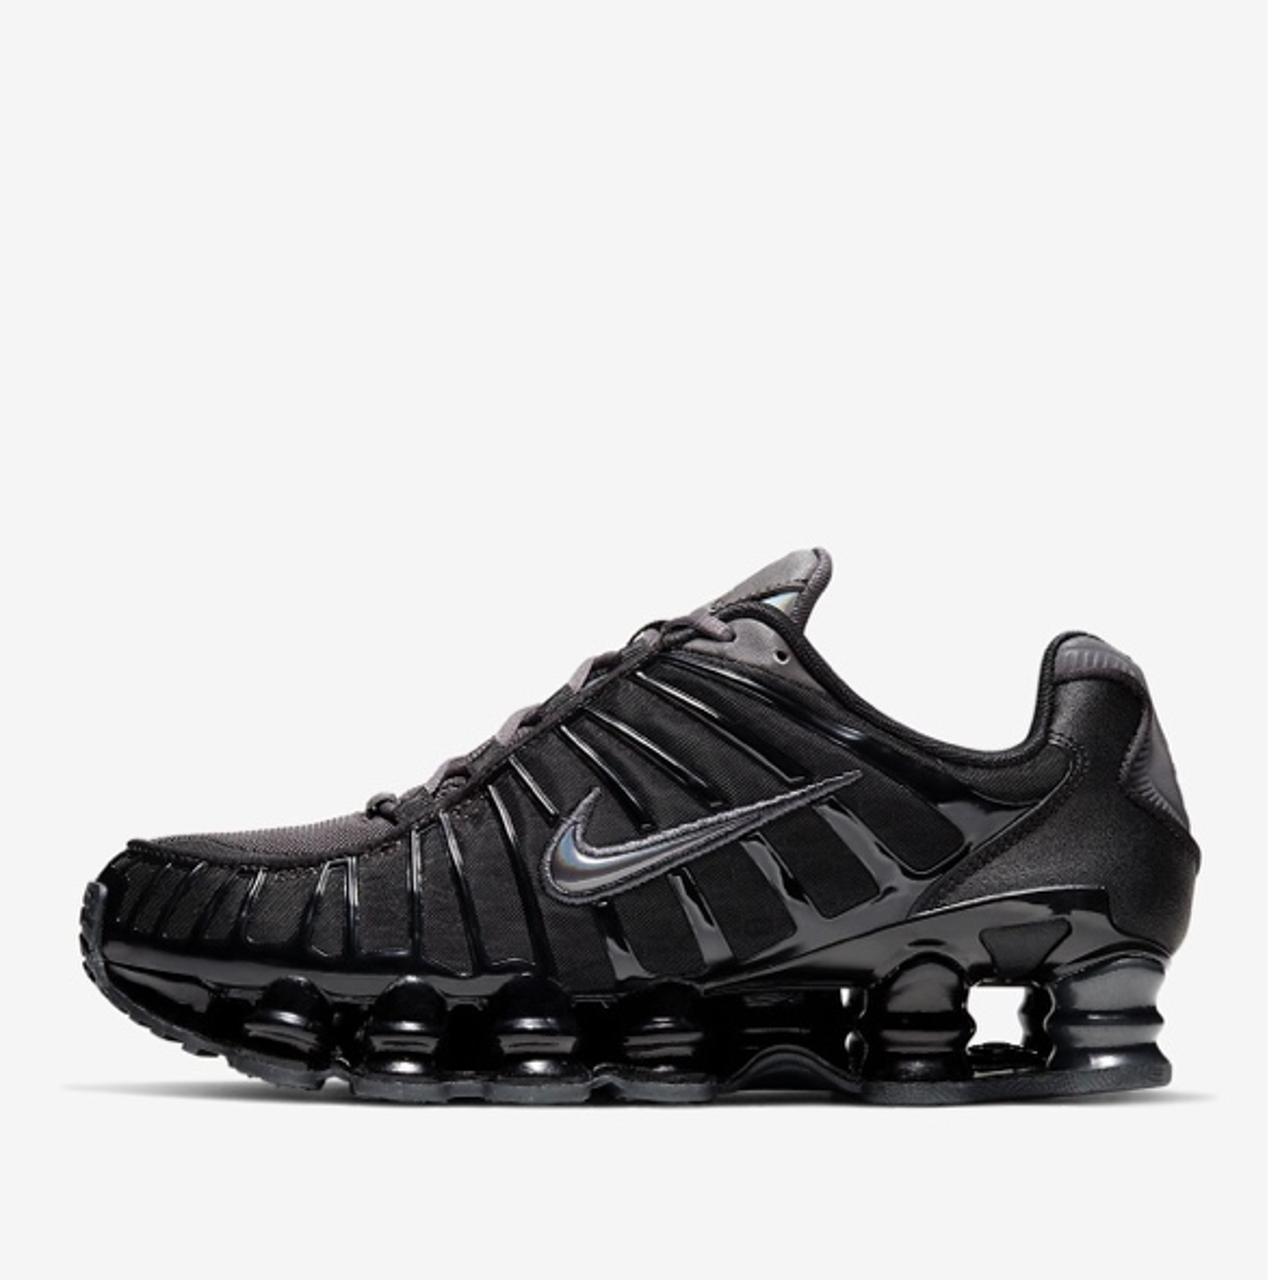 ALL SIZES GONE KEEP POSTED Nike shox TL trainers - Depop